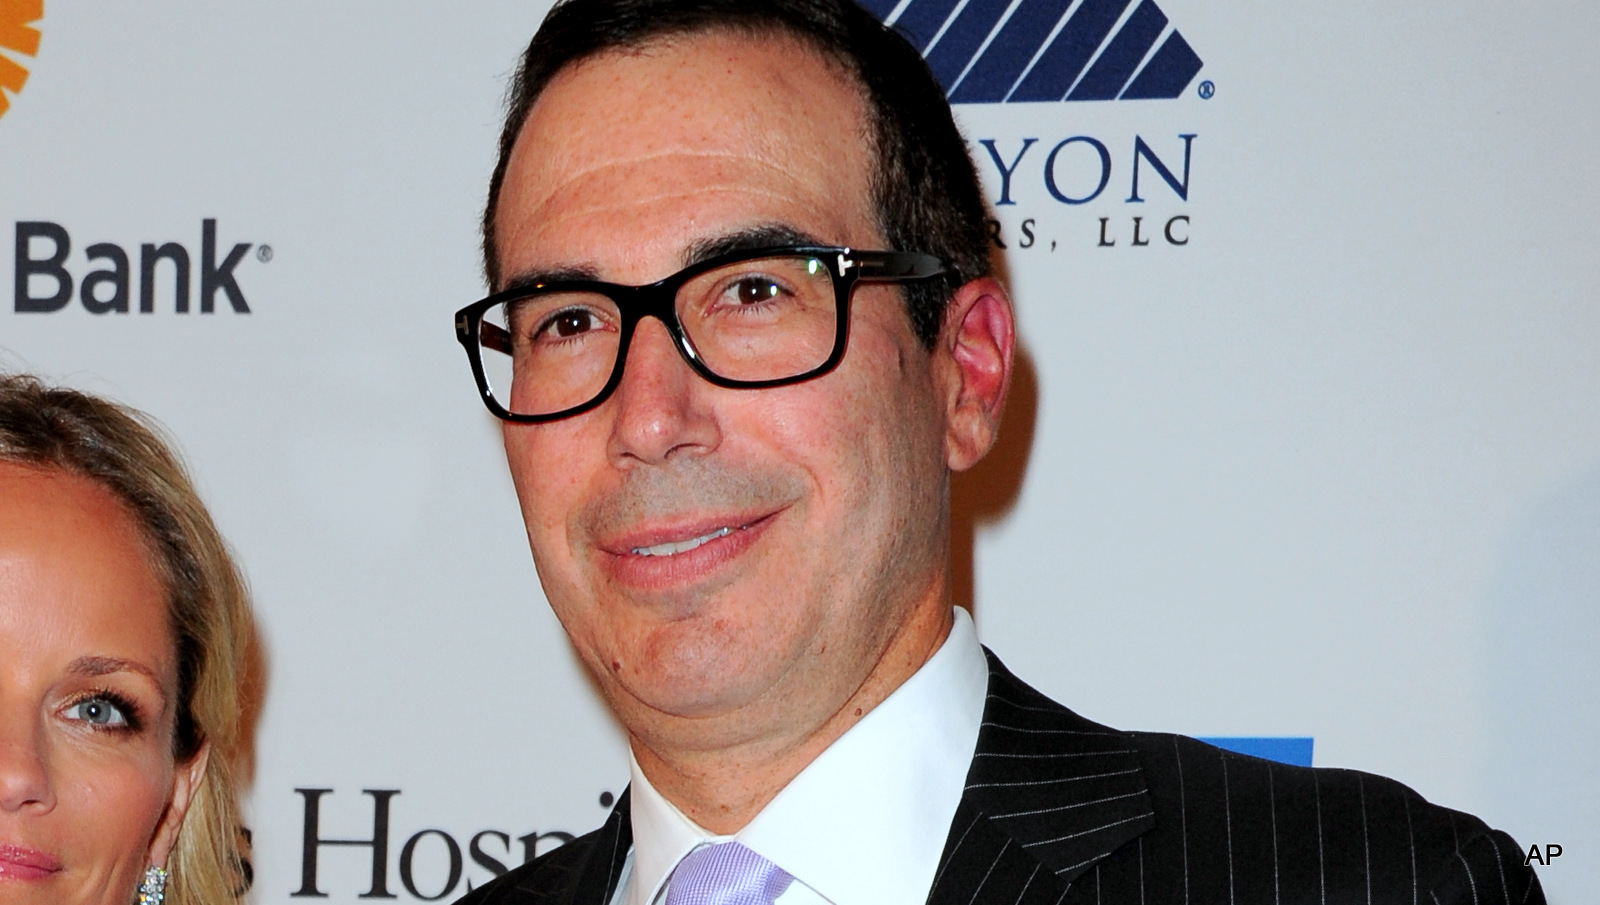 Steven Mnuchin at The Kaleidoscope Ball's "Designing The Future" at the Beverly Hills Hotel in Beverly Hills, Calif. Trump, the presumptive Republican presidential nominee, recently hired a national finance chairman, scheduled his first fundraiser and is on the cusp of signing a deal with the Republican Party that would enable him to solicit donations of more than $300,000 apiece from supporters. To help raise the needed funds, he tapped Steven Mnuchin, a New York investor with ties in Hollywood and Las Vegas, but no previous political fundraising experience. (Photo by Richard Shotwell/Invision/AP, File)